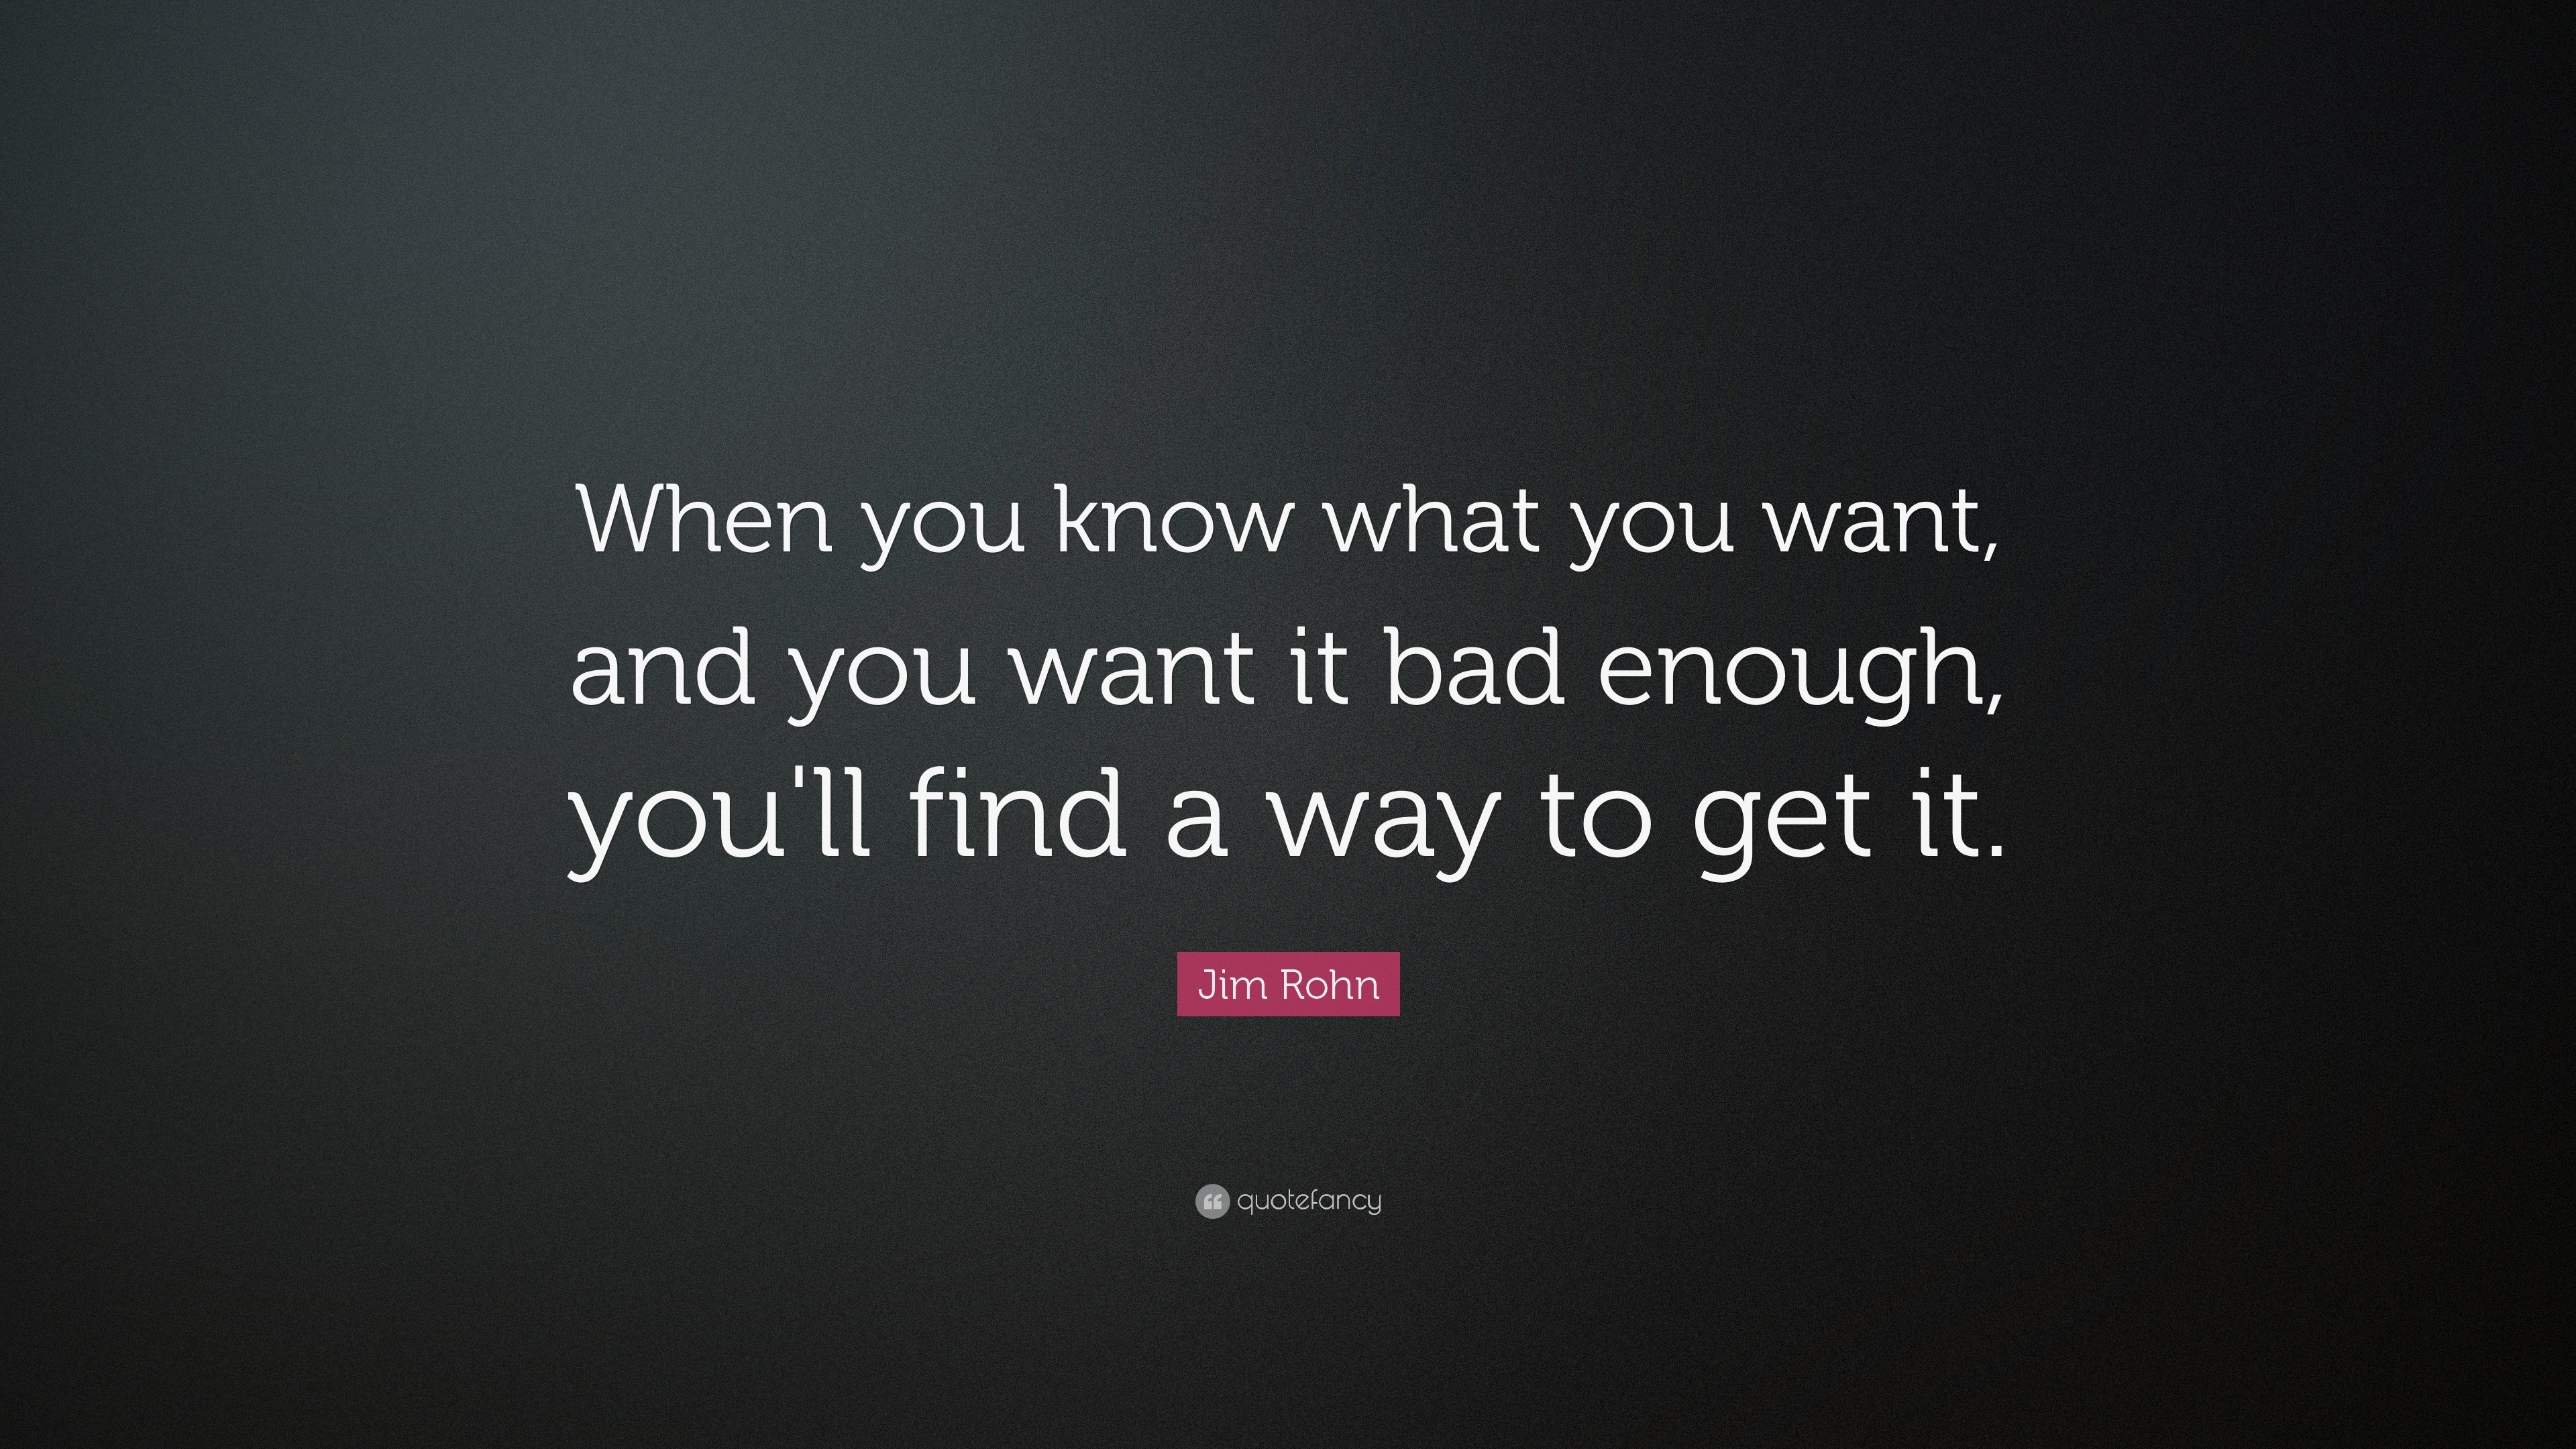 Jim Rohn Quote: “When You Know What You Want, And You Want It Bad Enough, You'